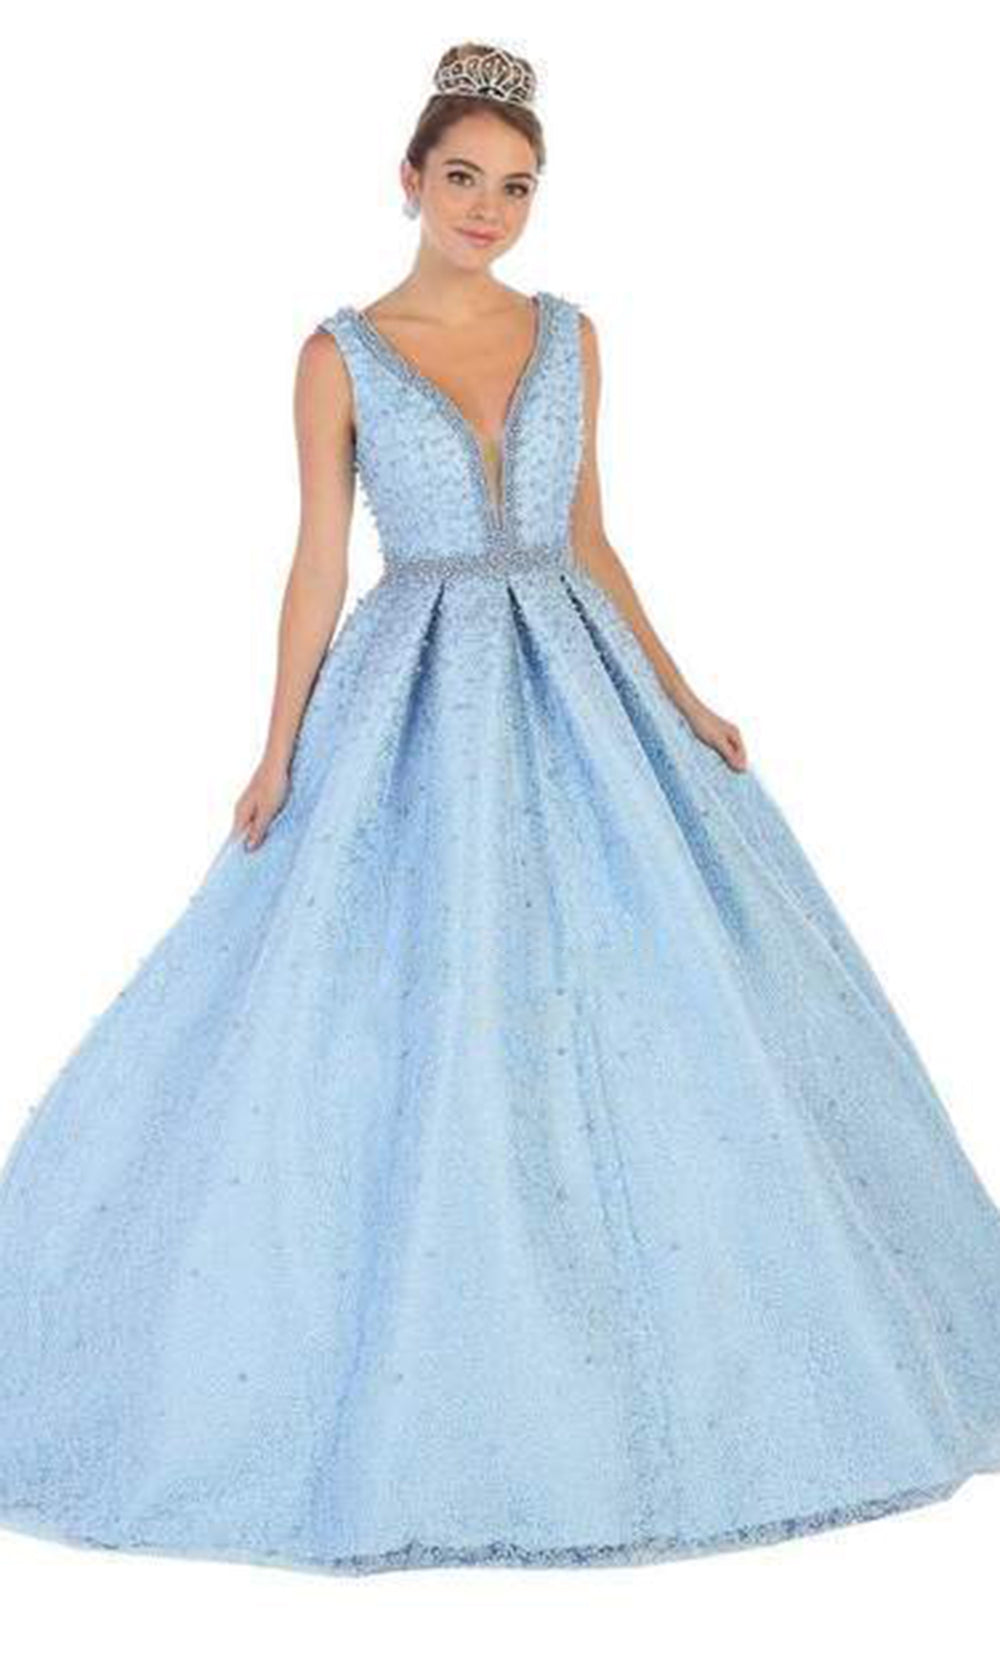 May Queen - Bead-Strewn Plunging Bodice Ballgown In Blue